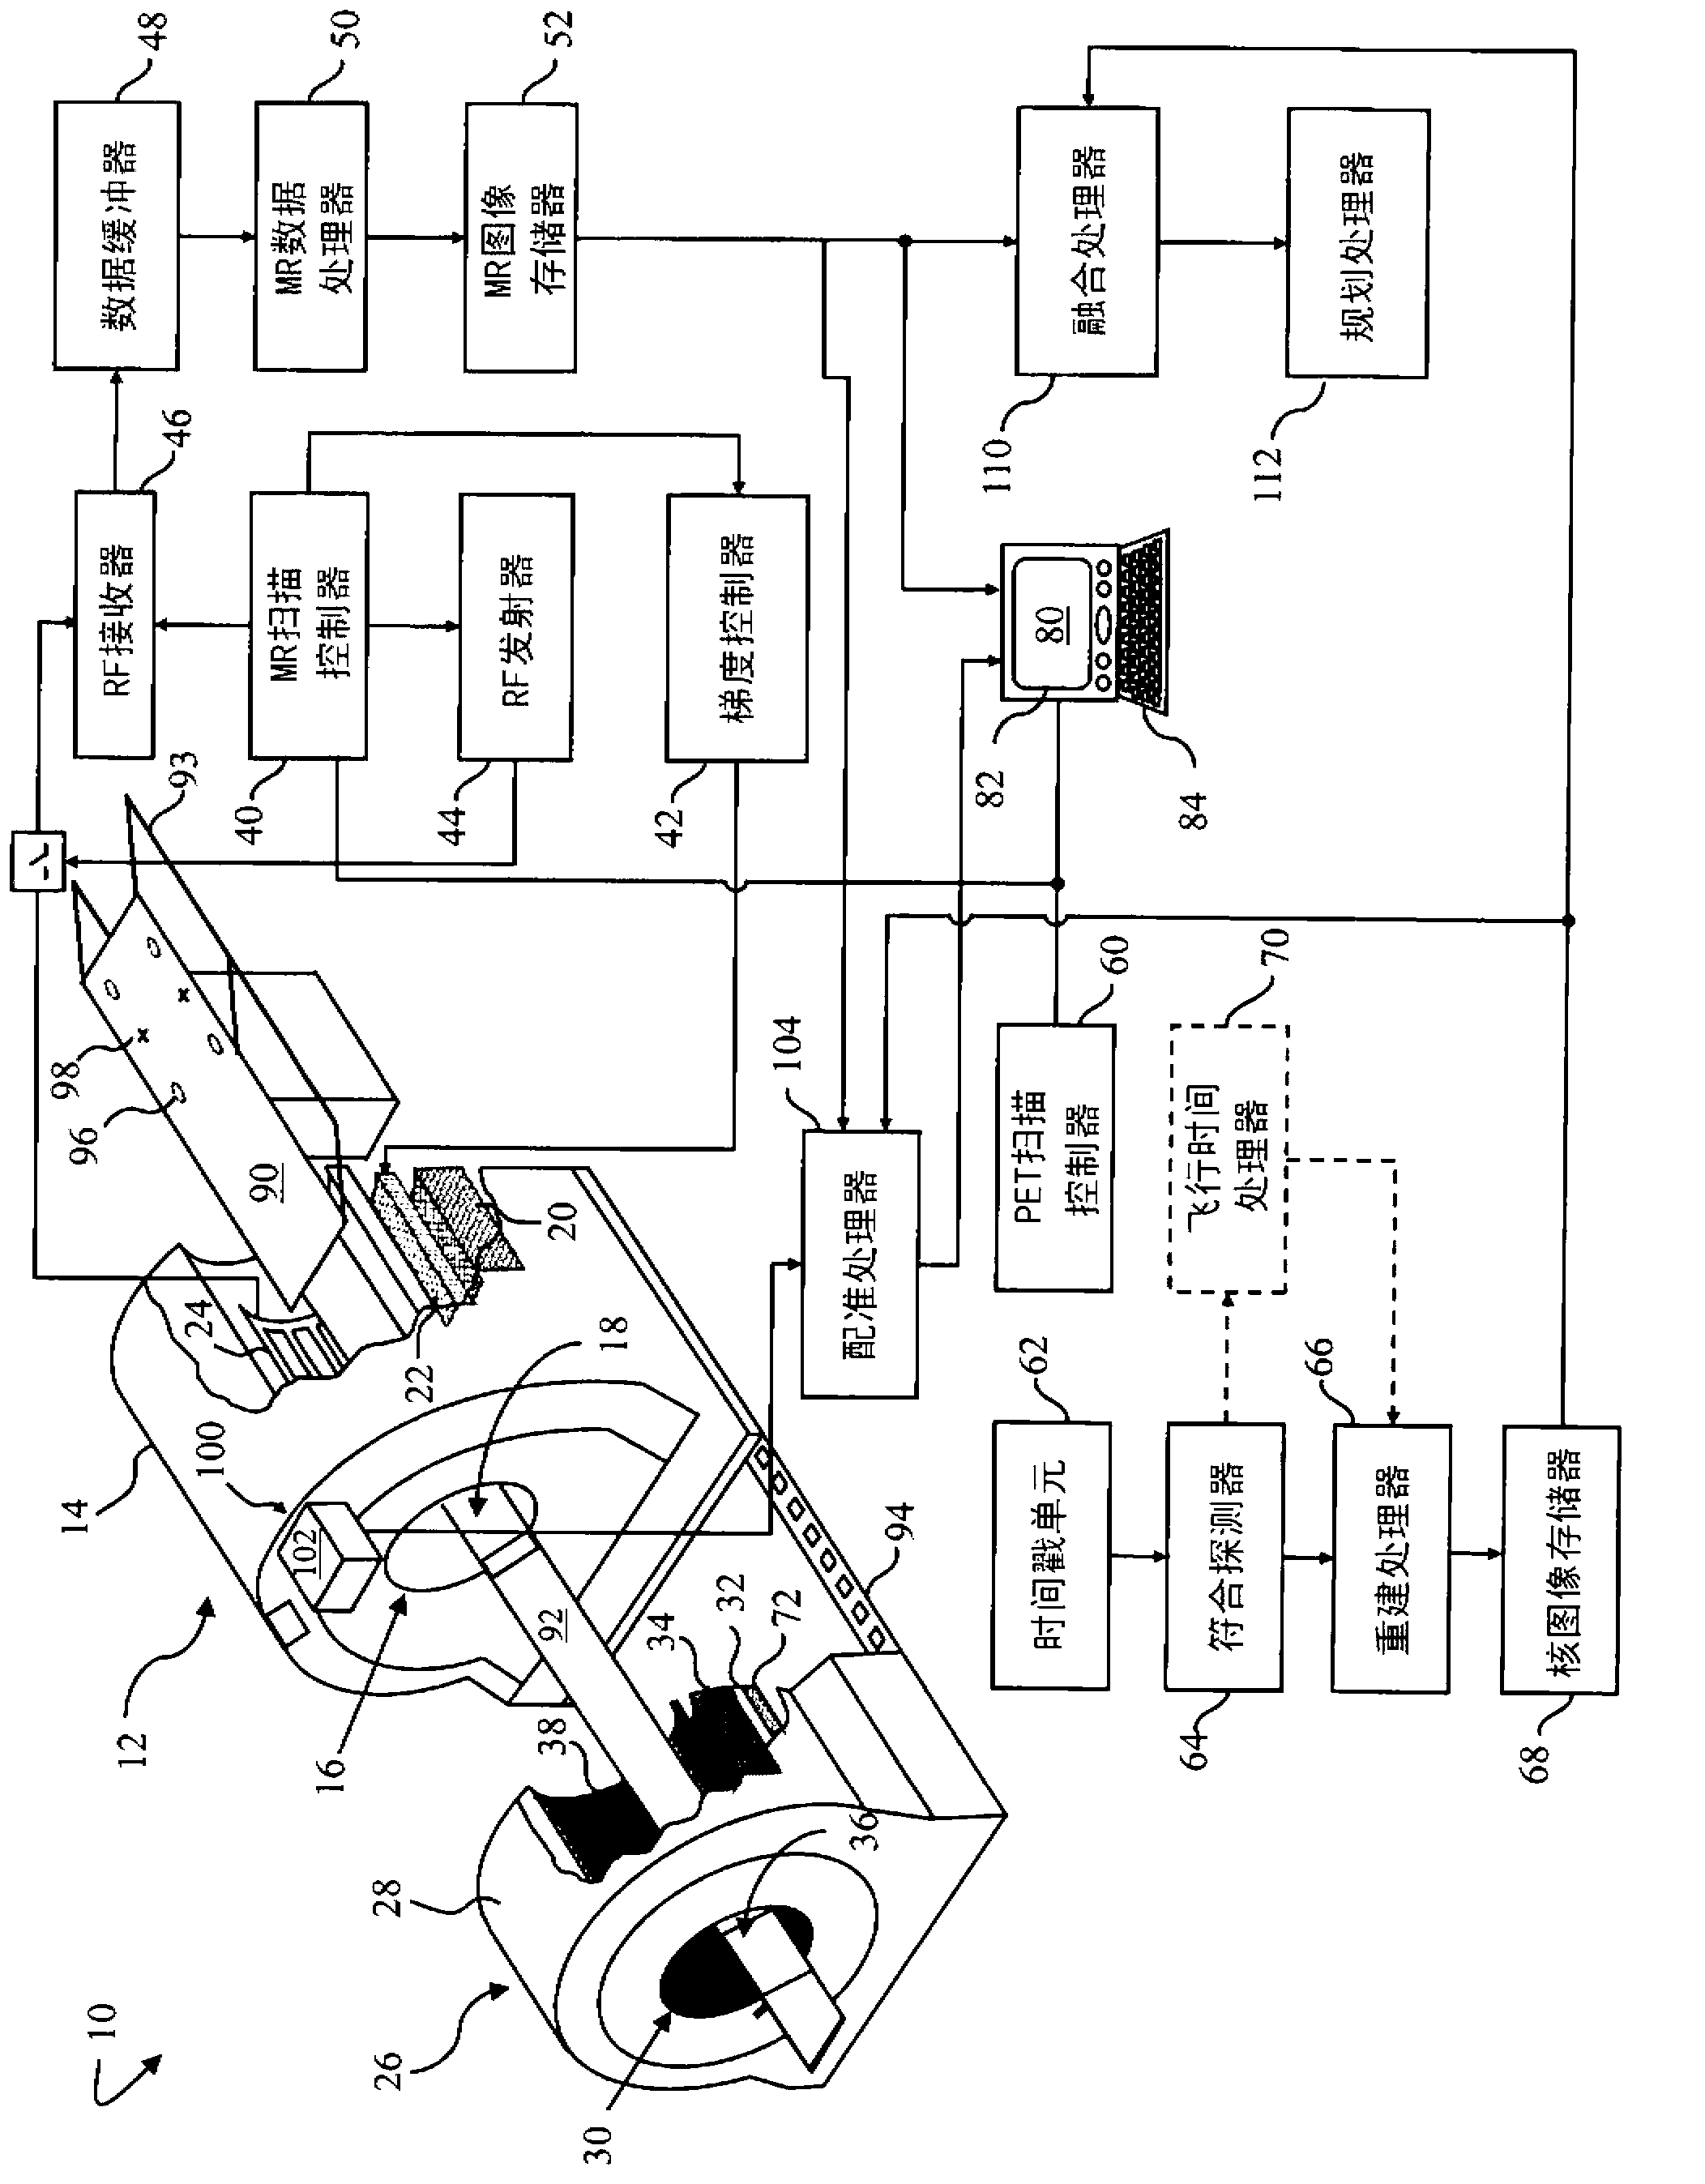 Radiation therapy planning and follow-up system with large bore nuclear and magnetic resonance imaging or large bore CT and magnetic resonance imaging